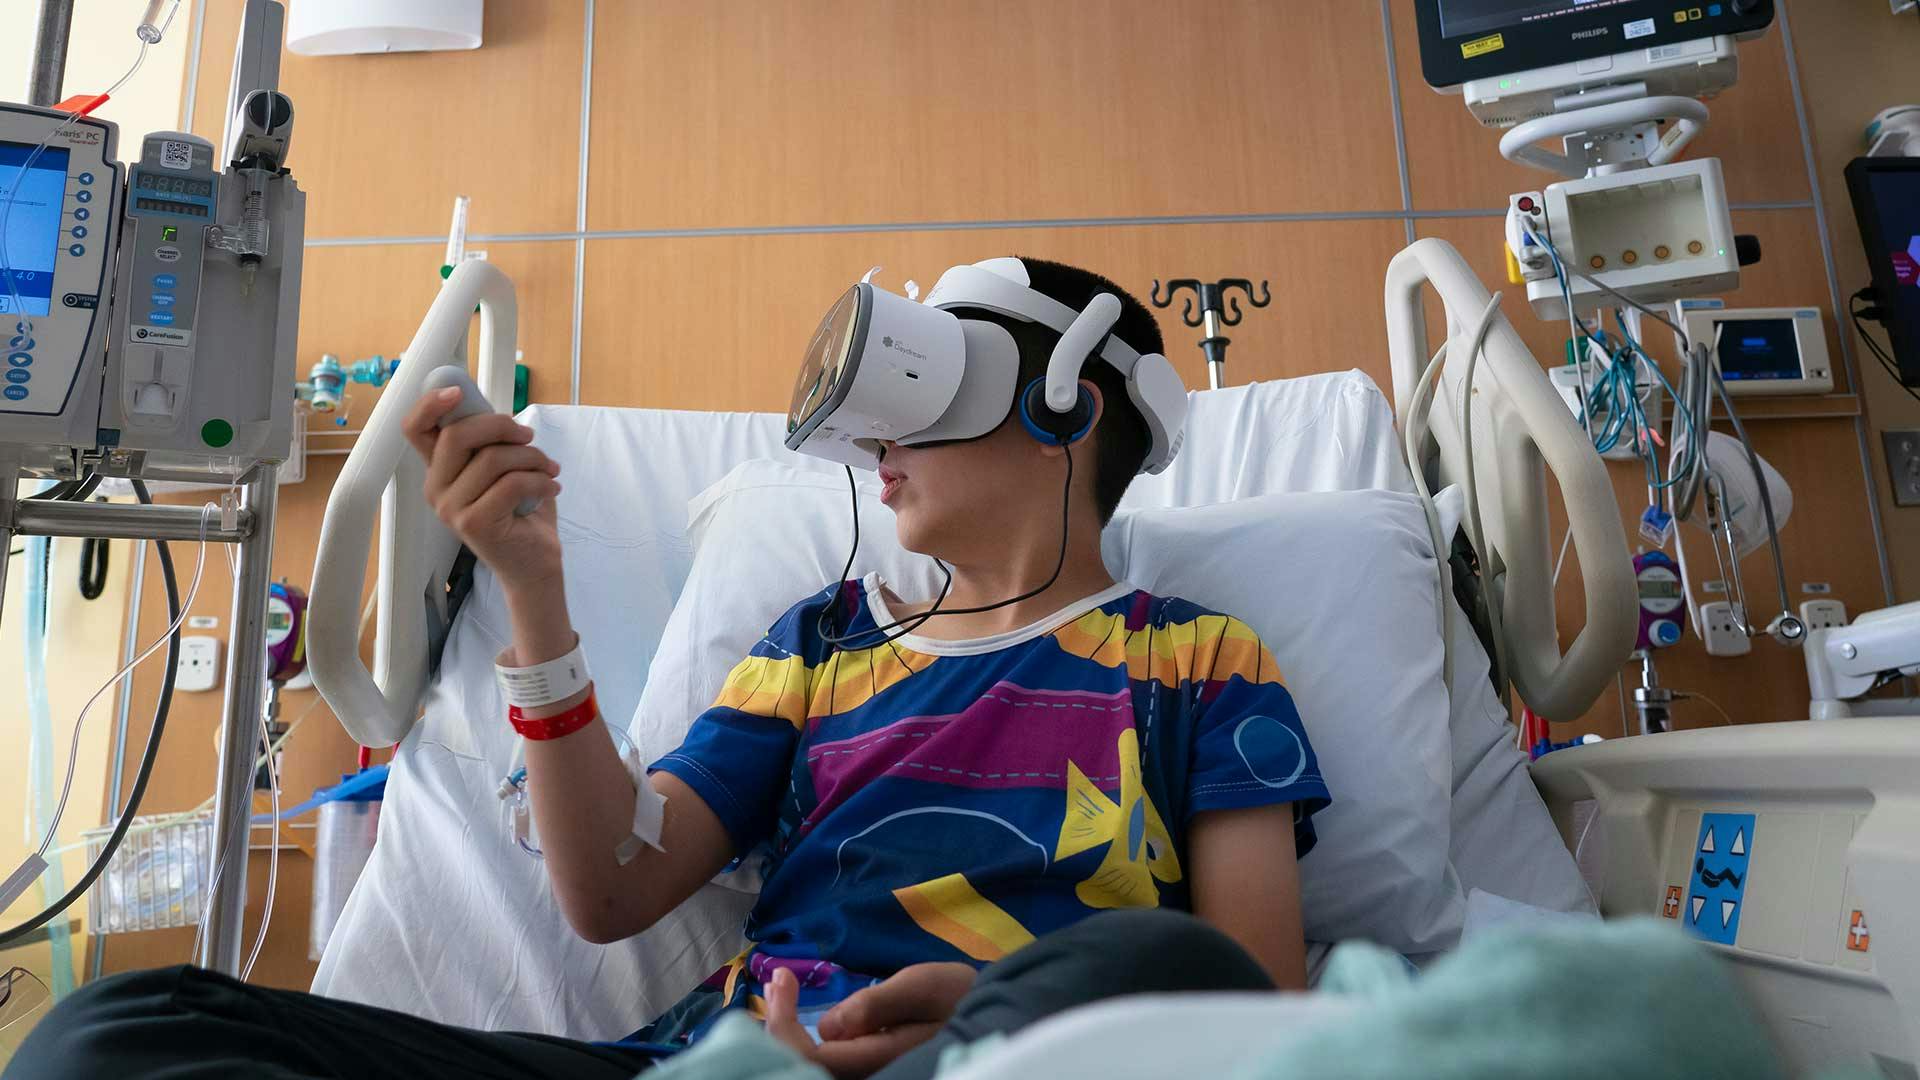 Boy Playing with Virtual Reality in Hospital Bed